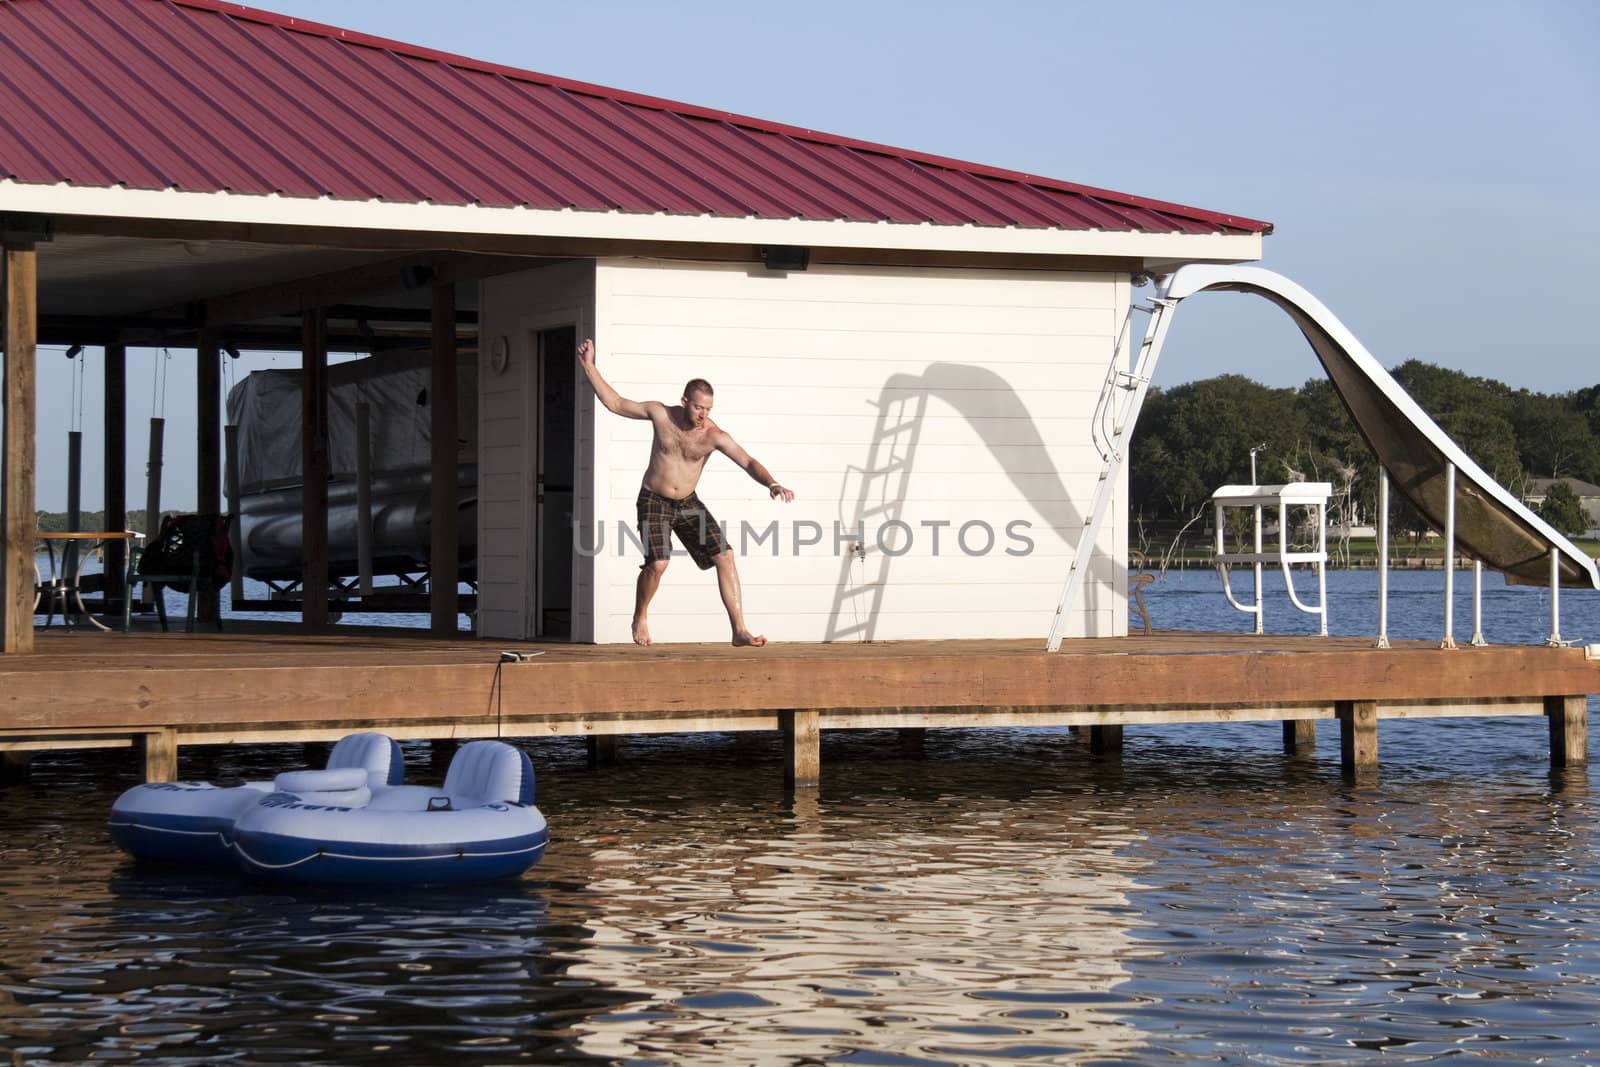 A man is doing a back flip off the end of a dock into the water